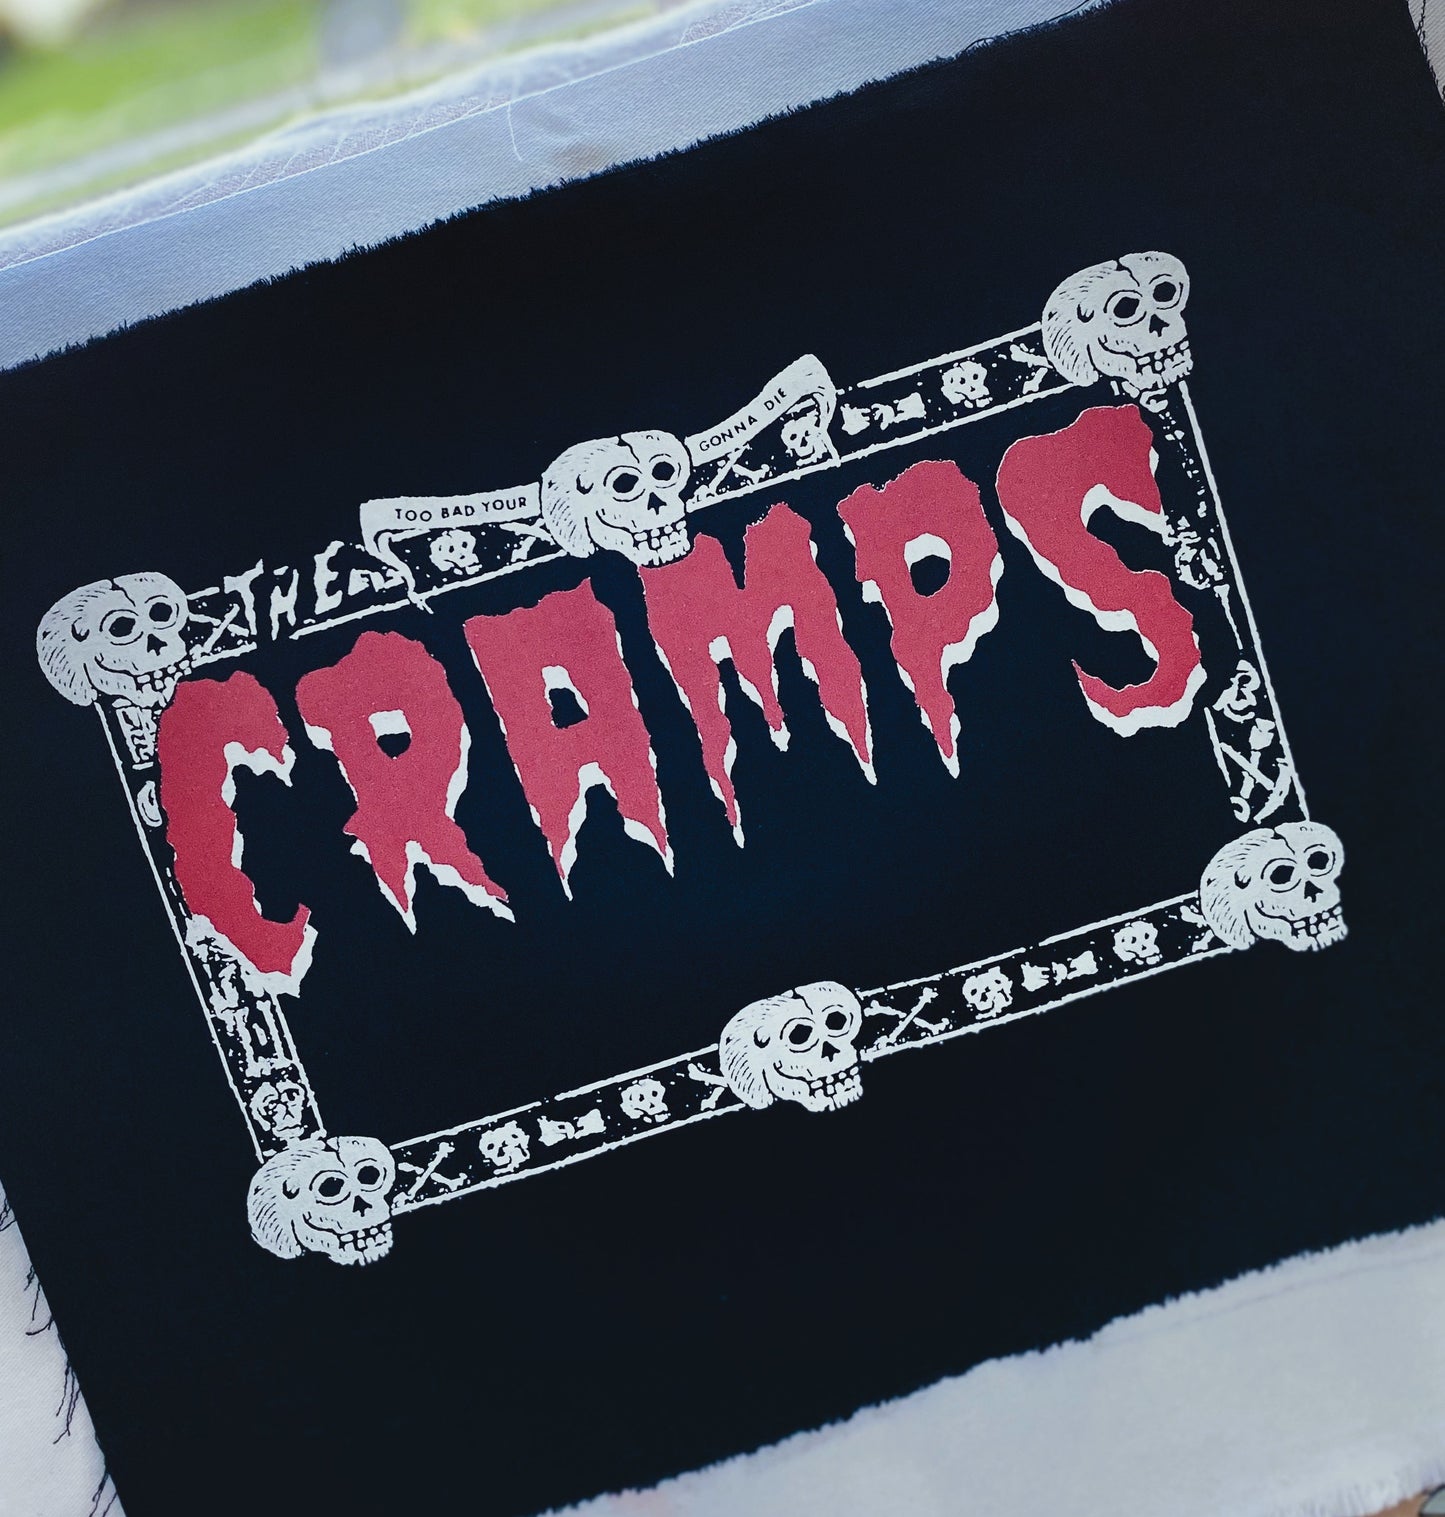 CRAMPS | "Too Bad Your Gunna Die" Back Patch